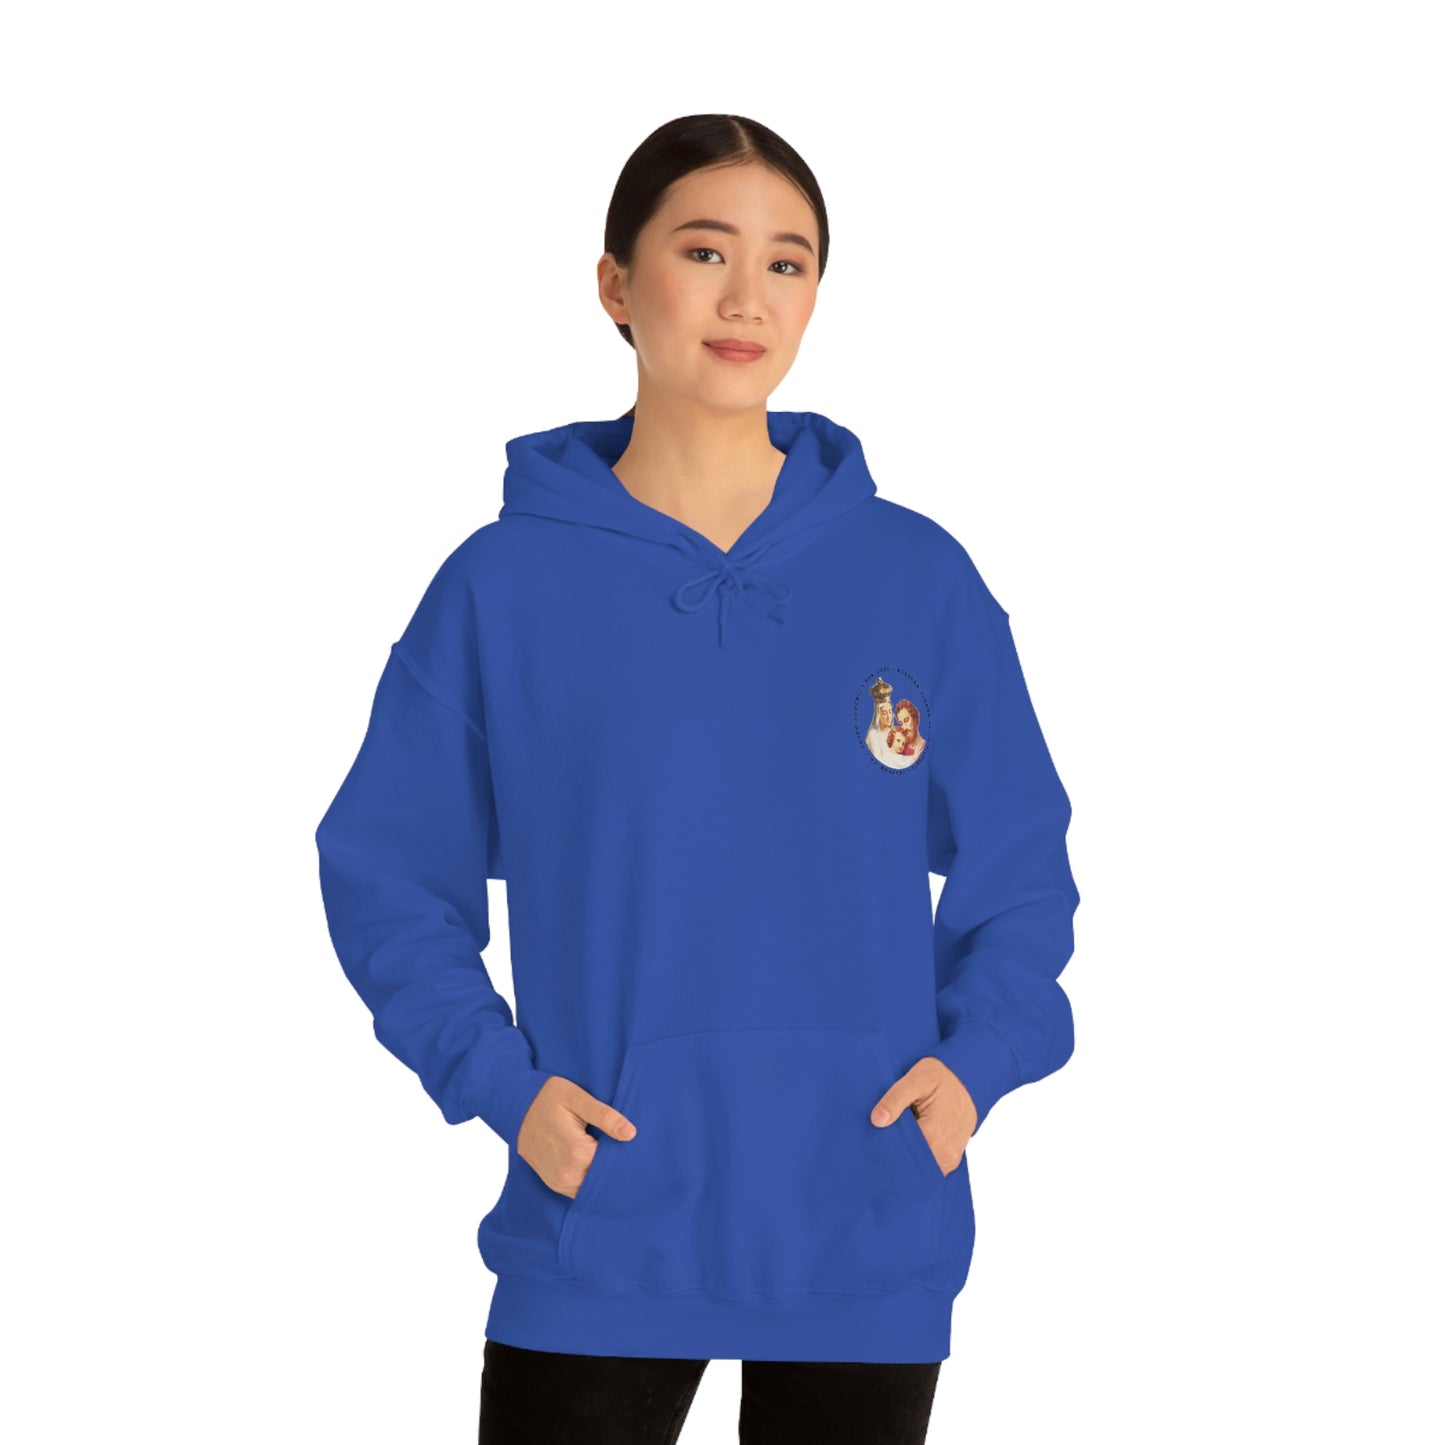 Our Lady of Victory One Sided Espanol Unisex Heavy Blend™ Hooded Sweatshirt